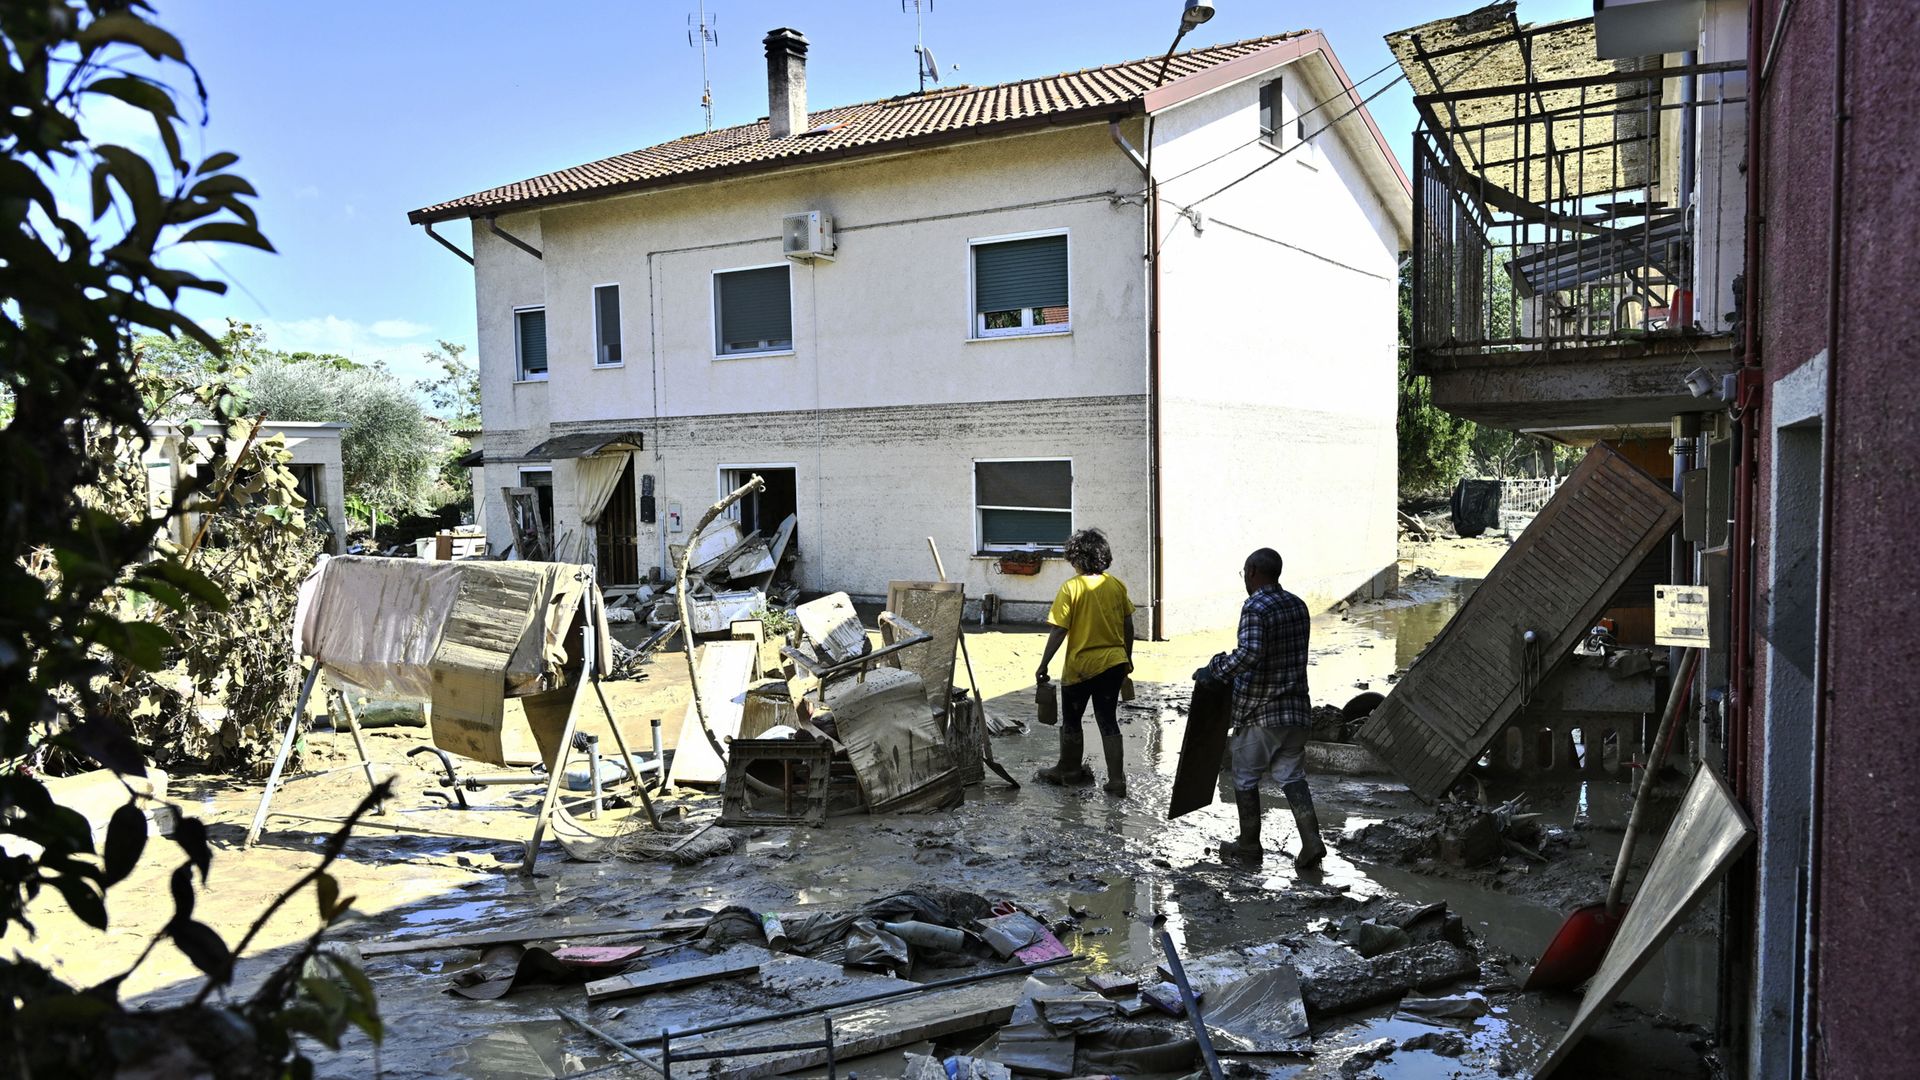 People cleaning outside a flooded house in Pianello di Ostra, Italy, on Sept. 16.